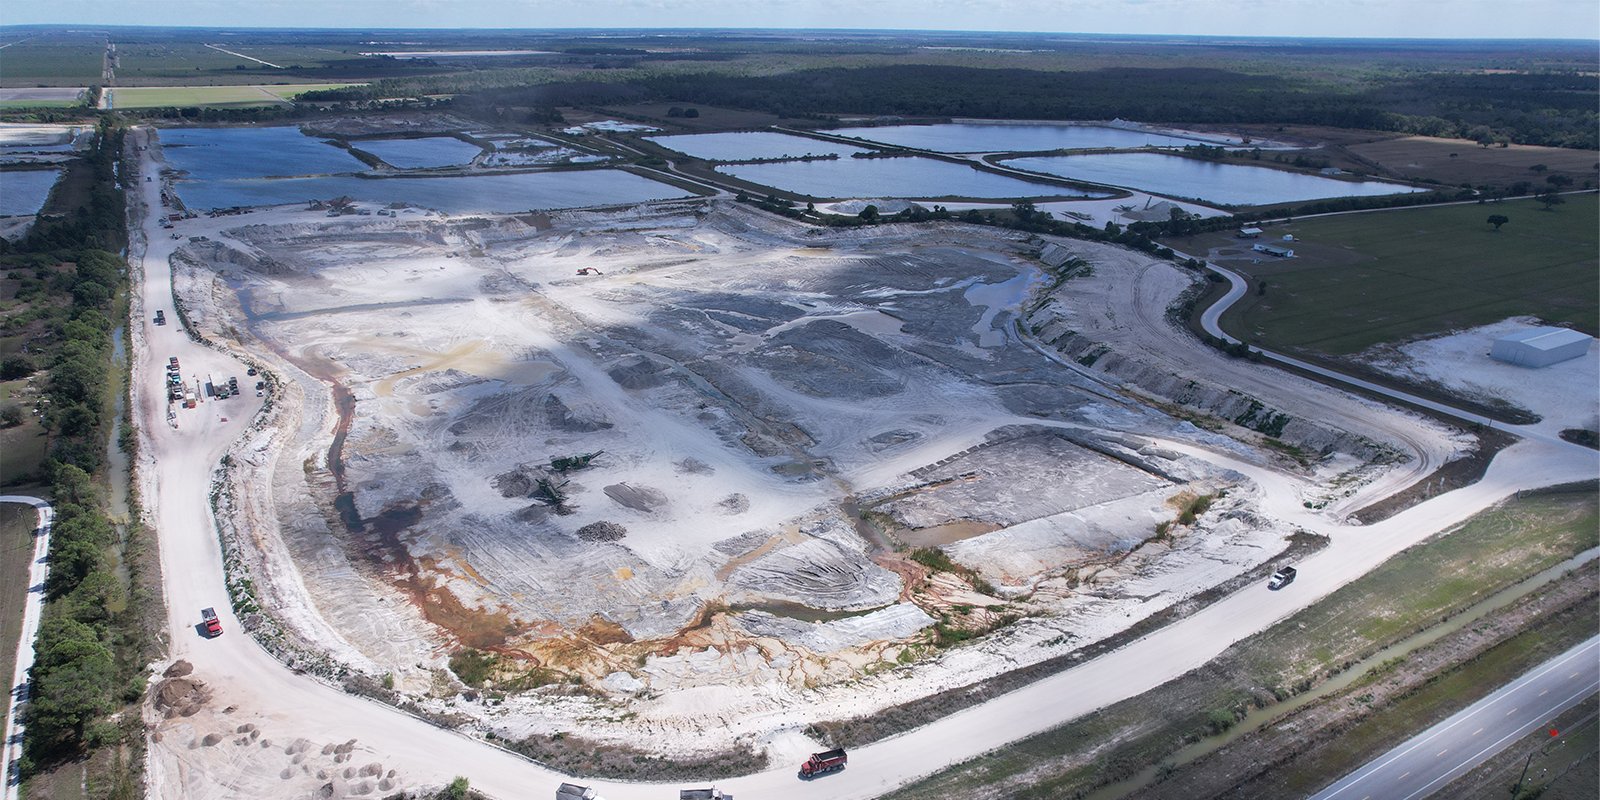 birds eye view of an aggregate mining site